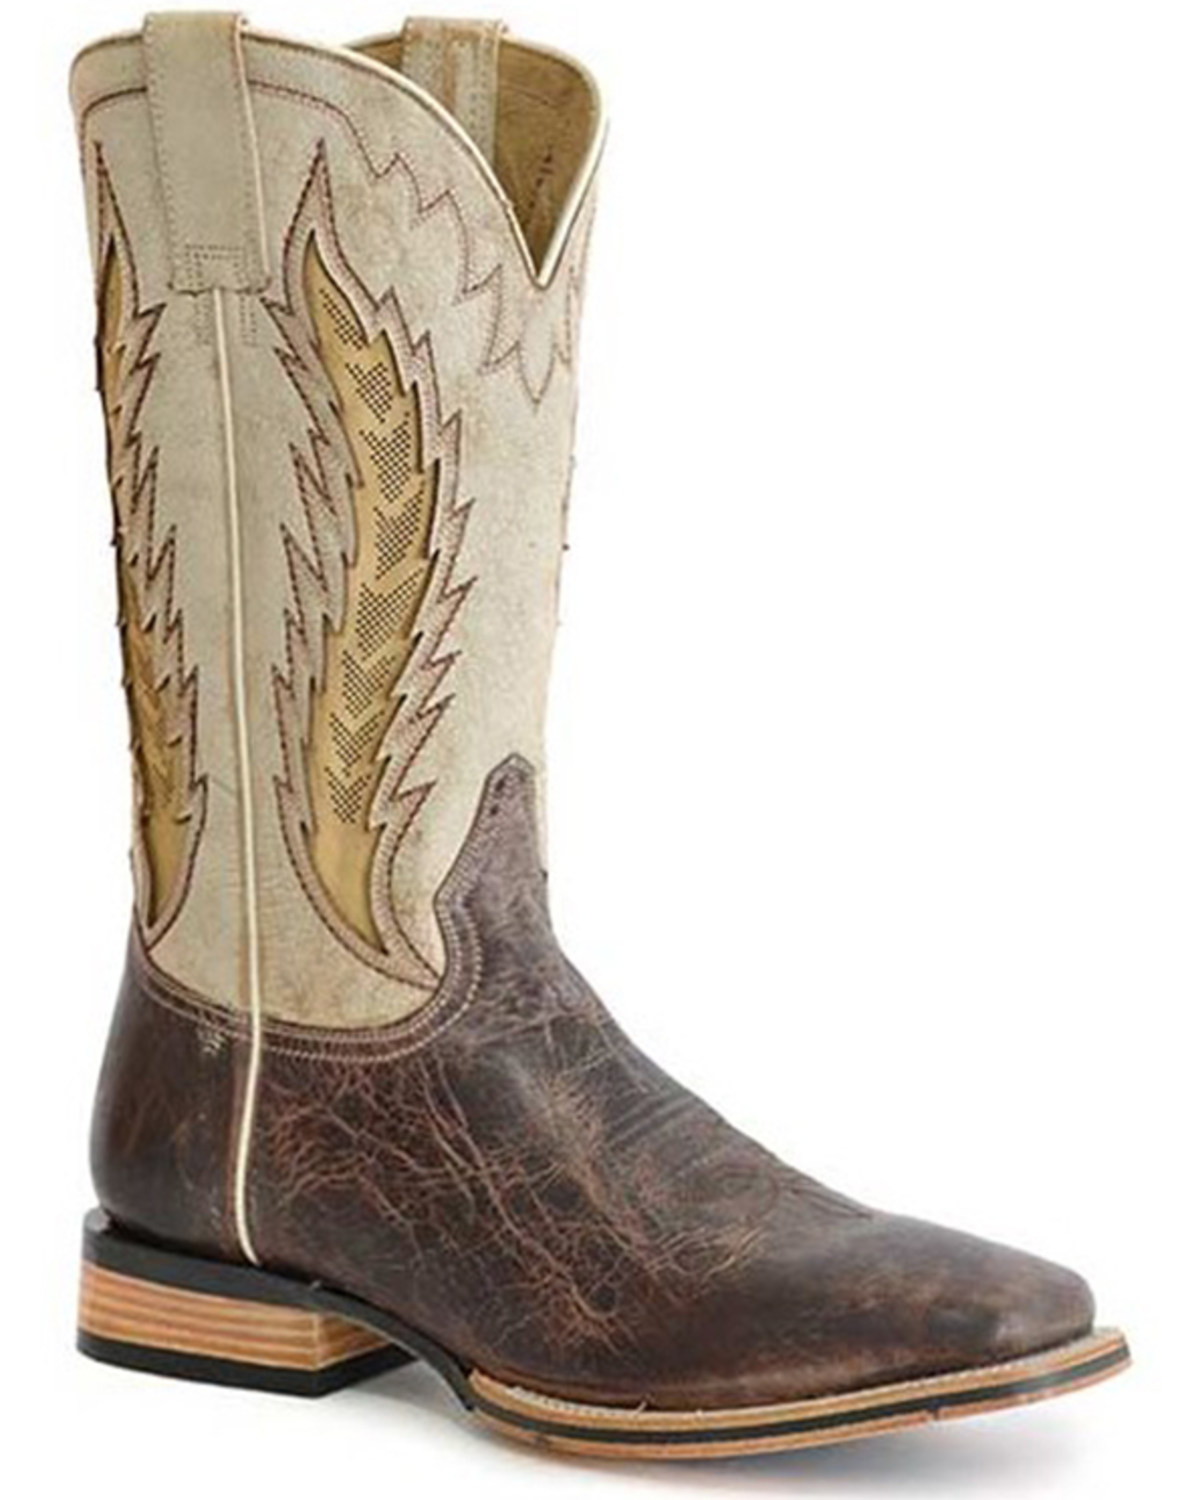 Stetson Men's Airflow Crackle Shaft Handcrafted Western Boots - Broad Square Toe